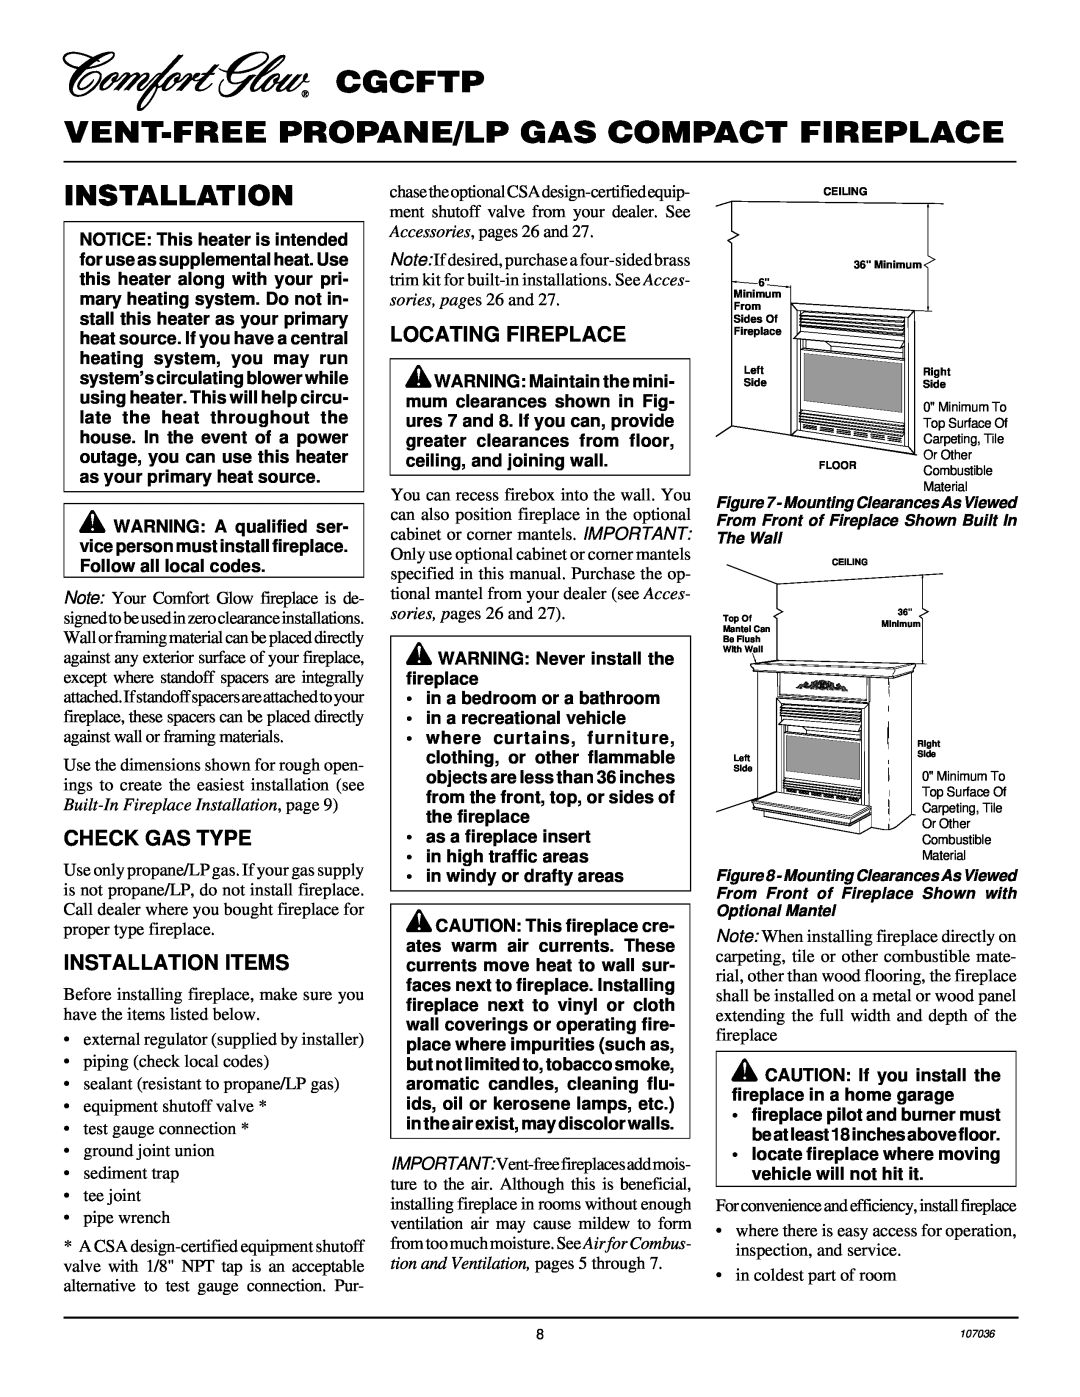 Desa 000 to 26, CGCFTP 14 installation manual Locating Fireplace, Check Gas Type, Installation Items 